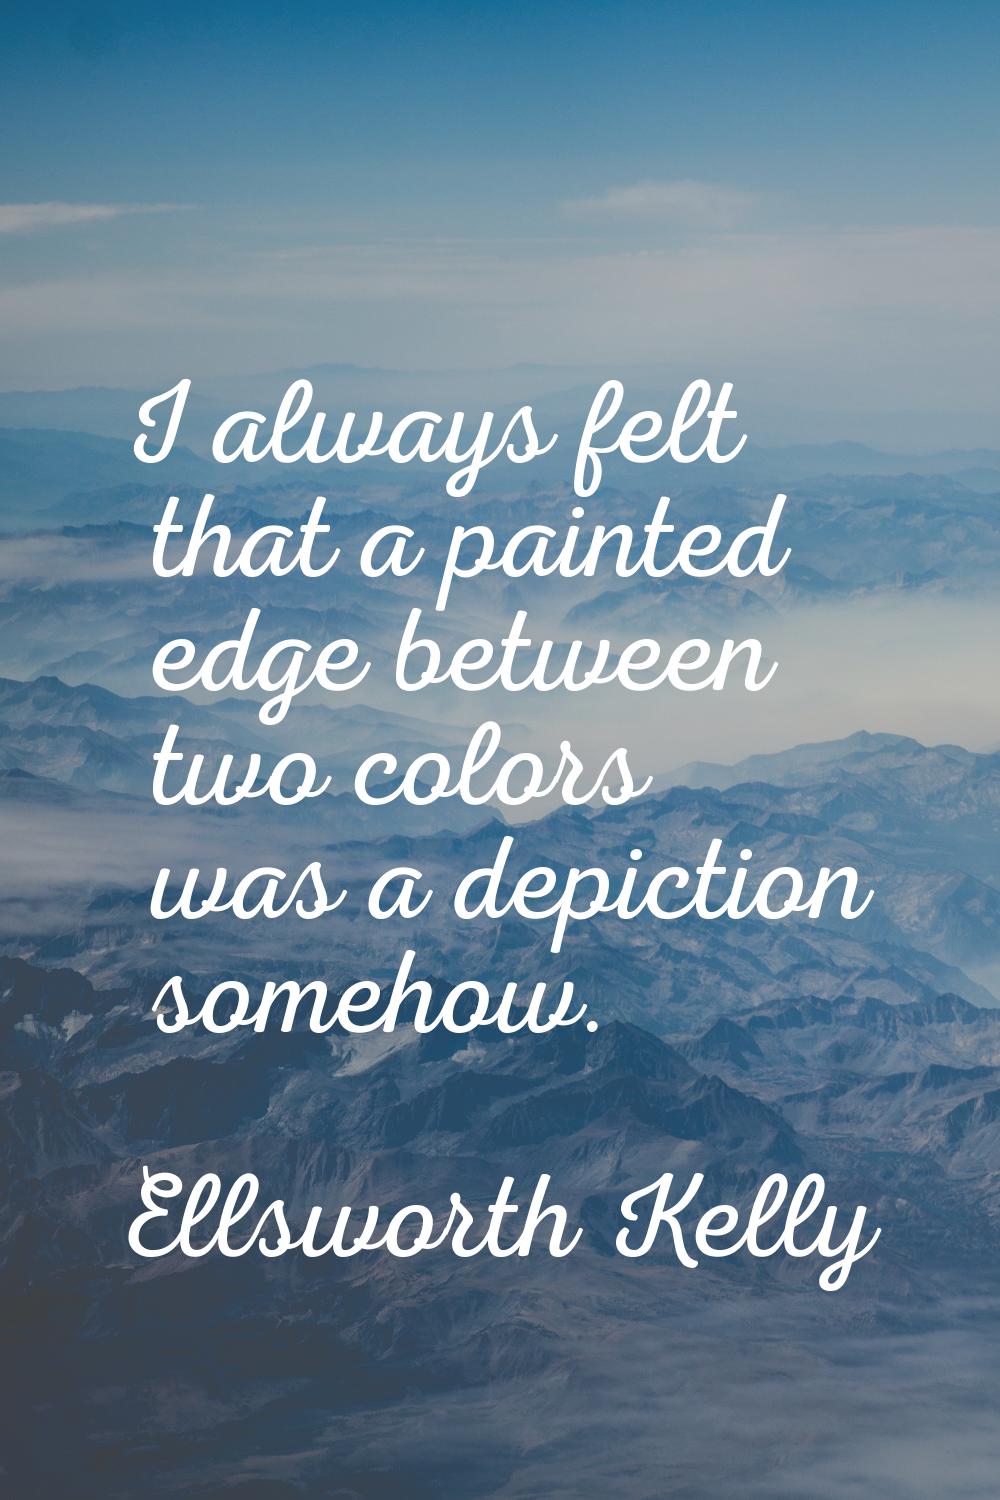 I always felt that a painted edge between two colors was a depiction somehow.